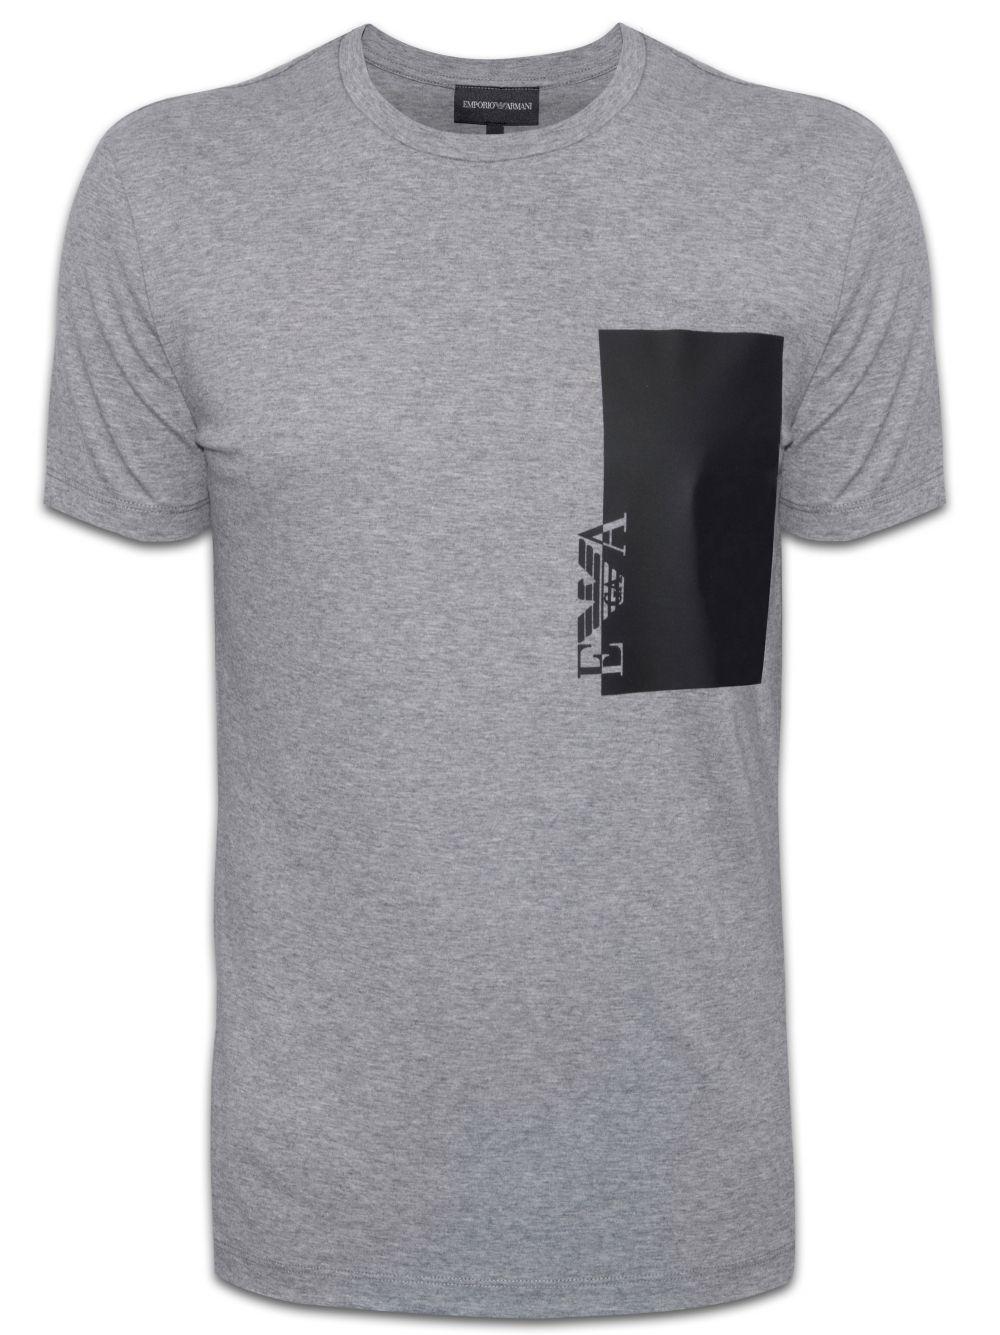 Grey Square Logo - Shop Now For Mens Emporio Armani | T-Shirts Available Now A/W 16